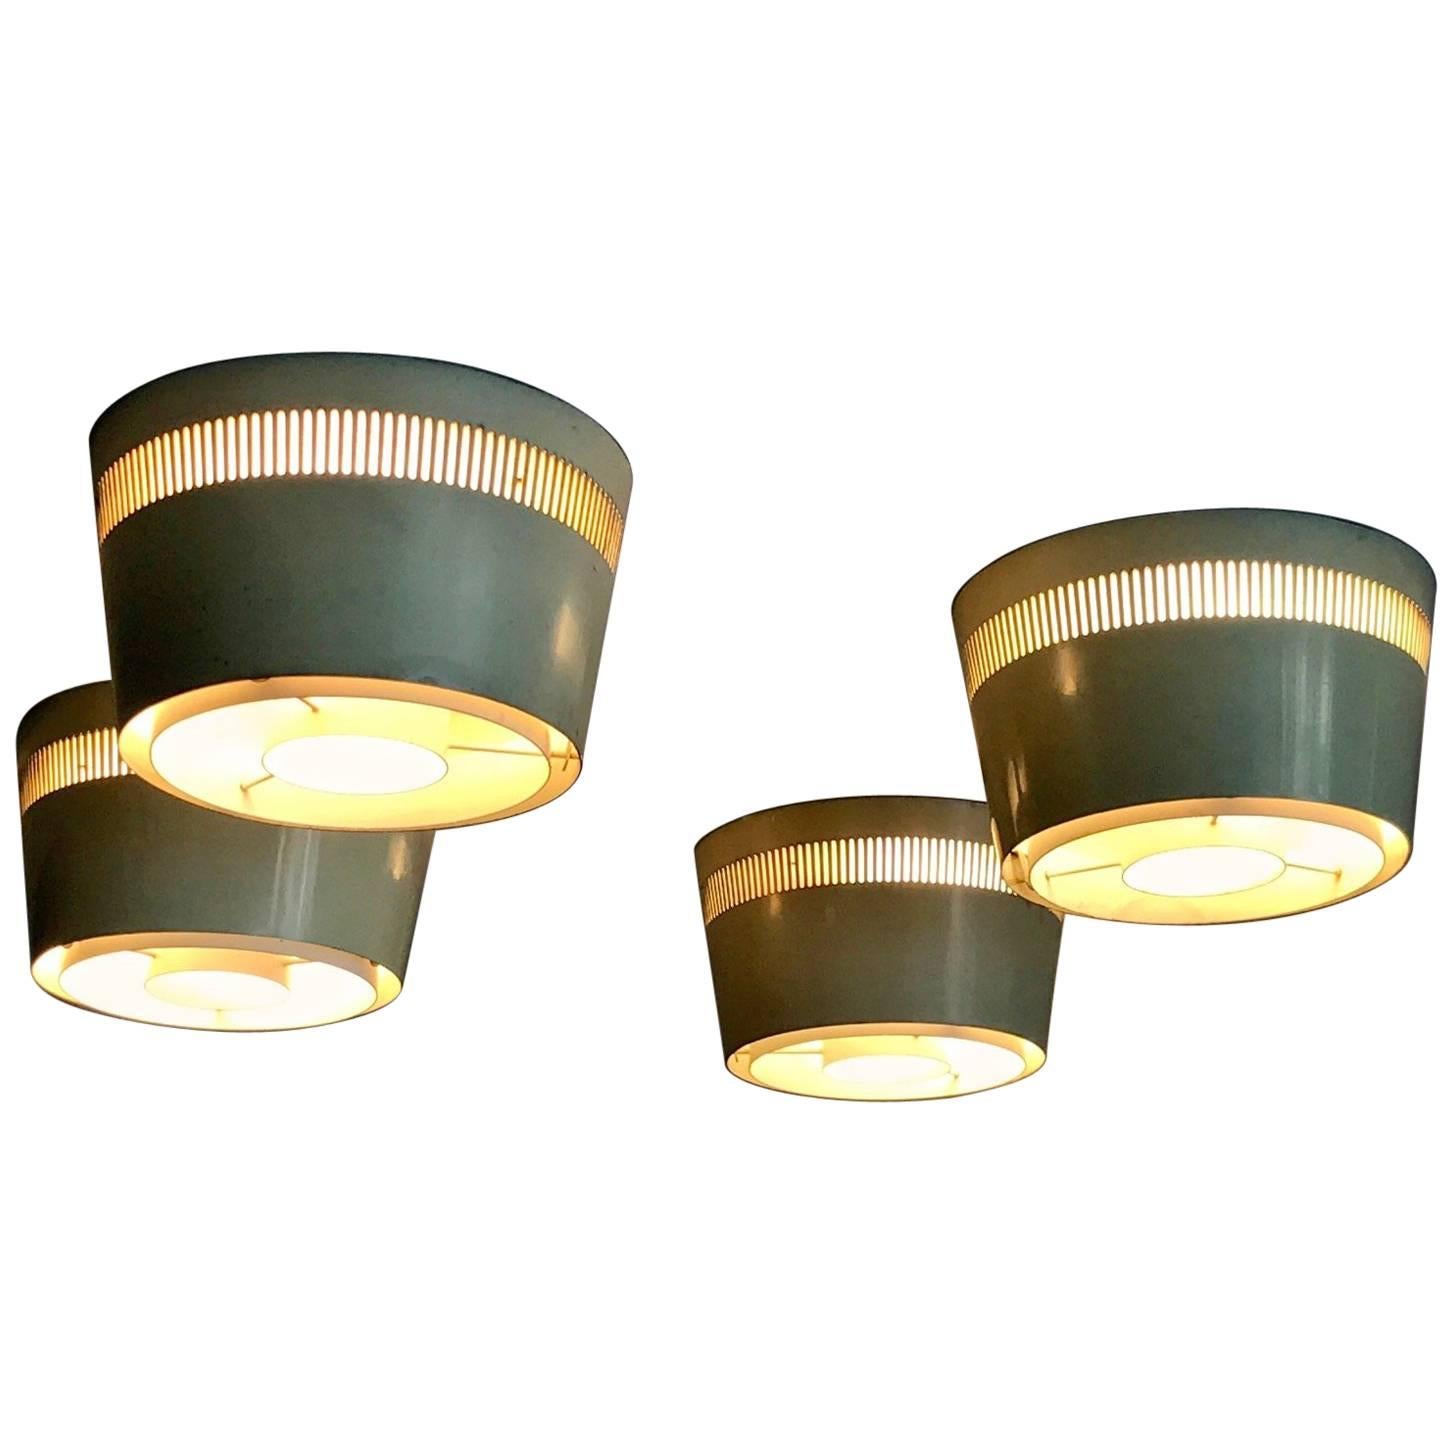 Set of Four Ceiling Lights by Itsu, Finland, 1950s For Sale